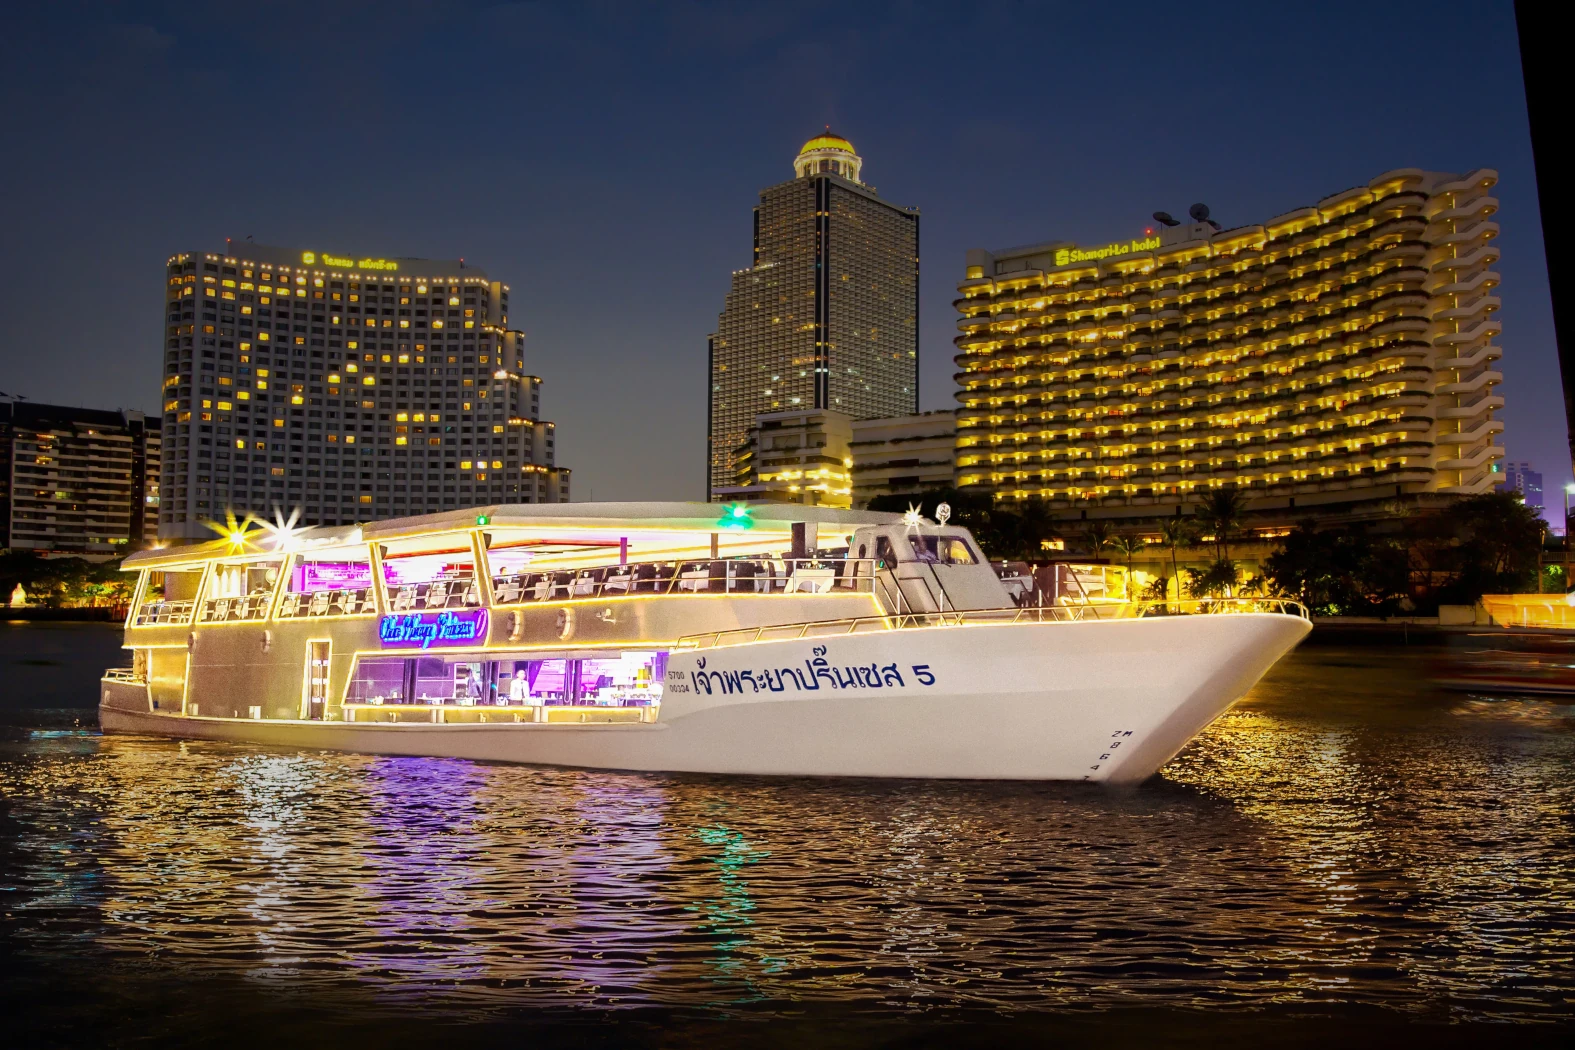 Chao Phraya dinner cruise boat adorned with lights.